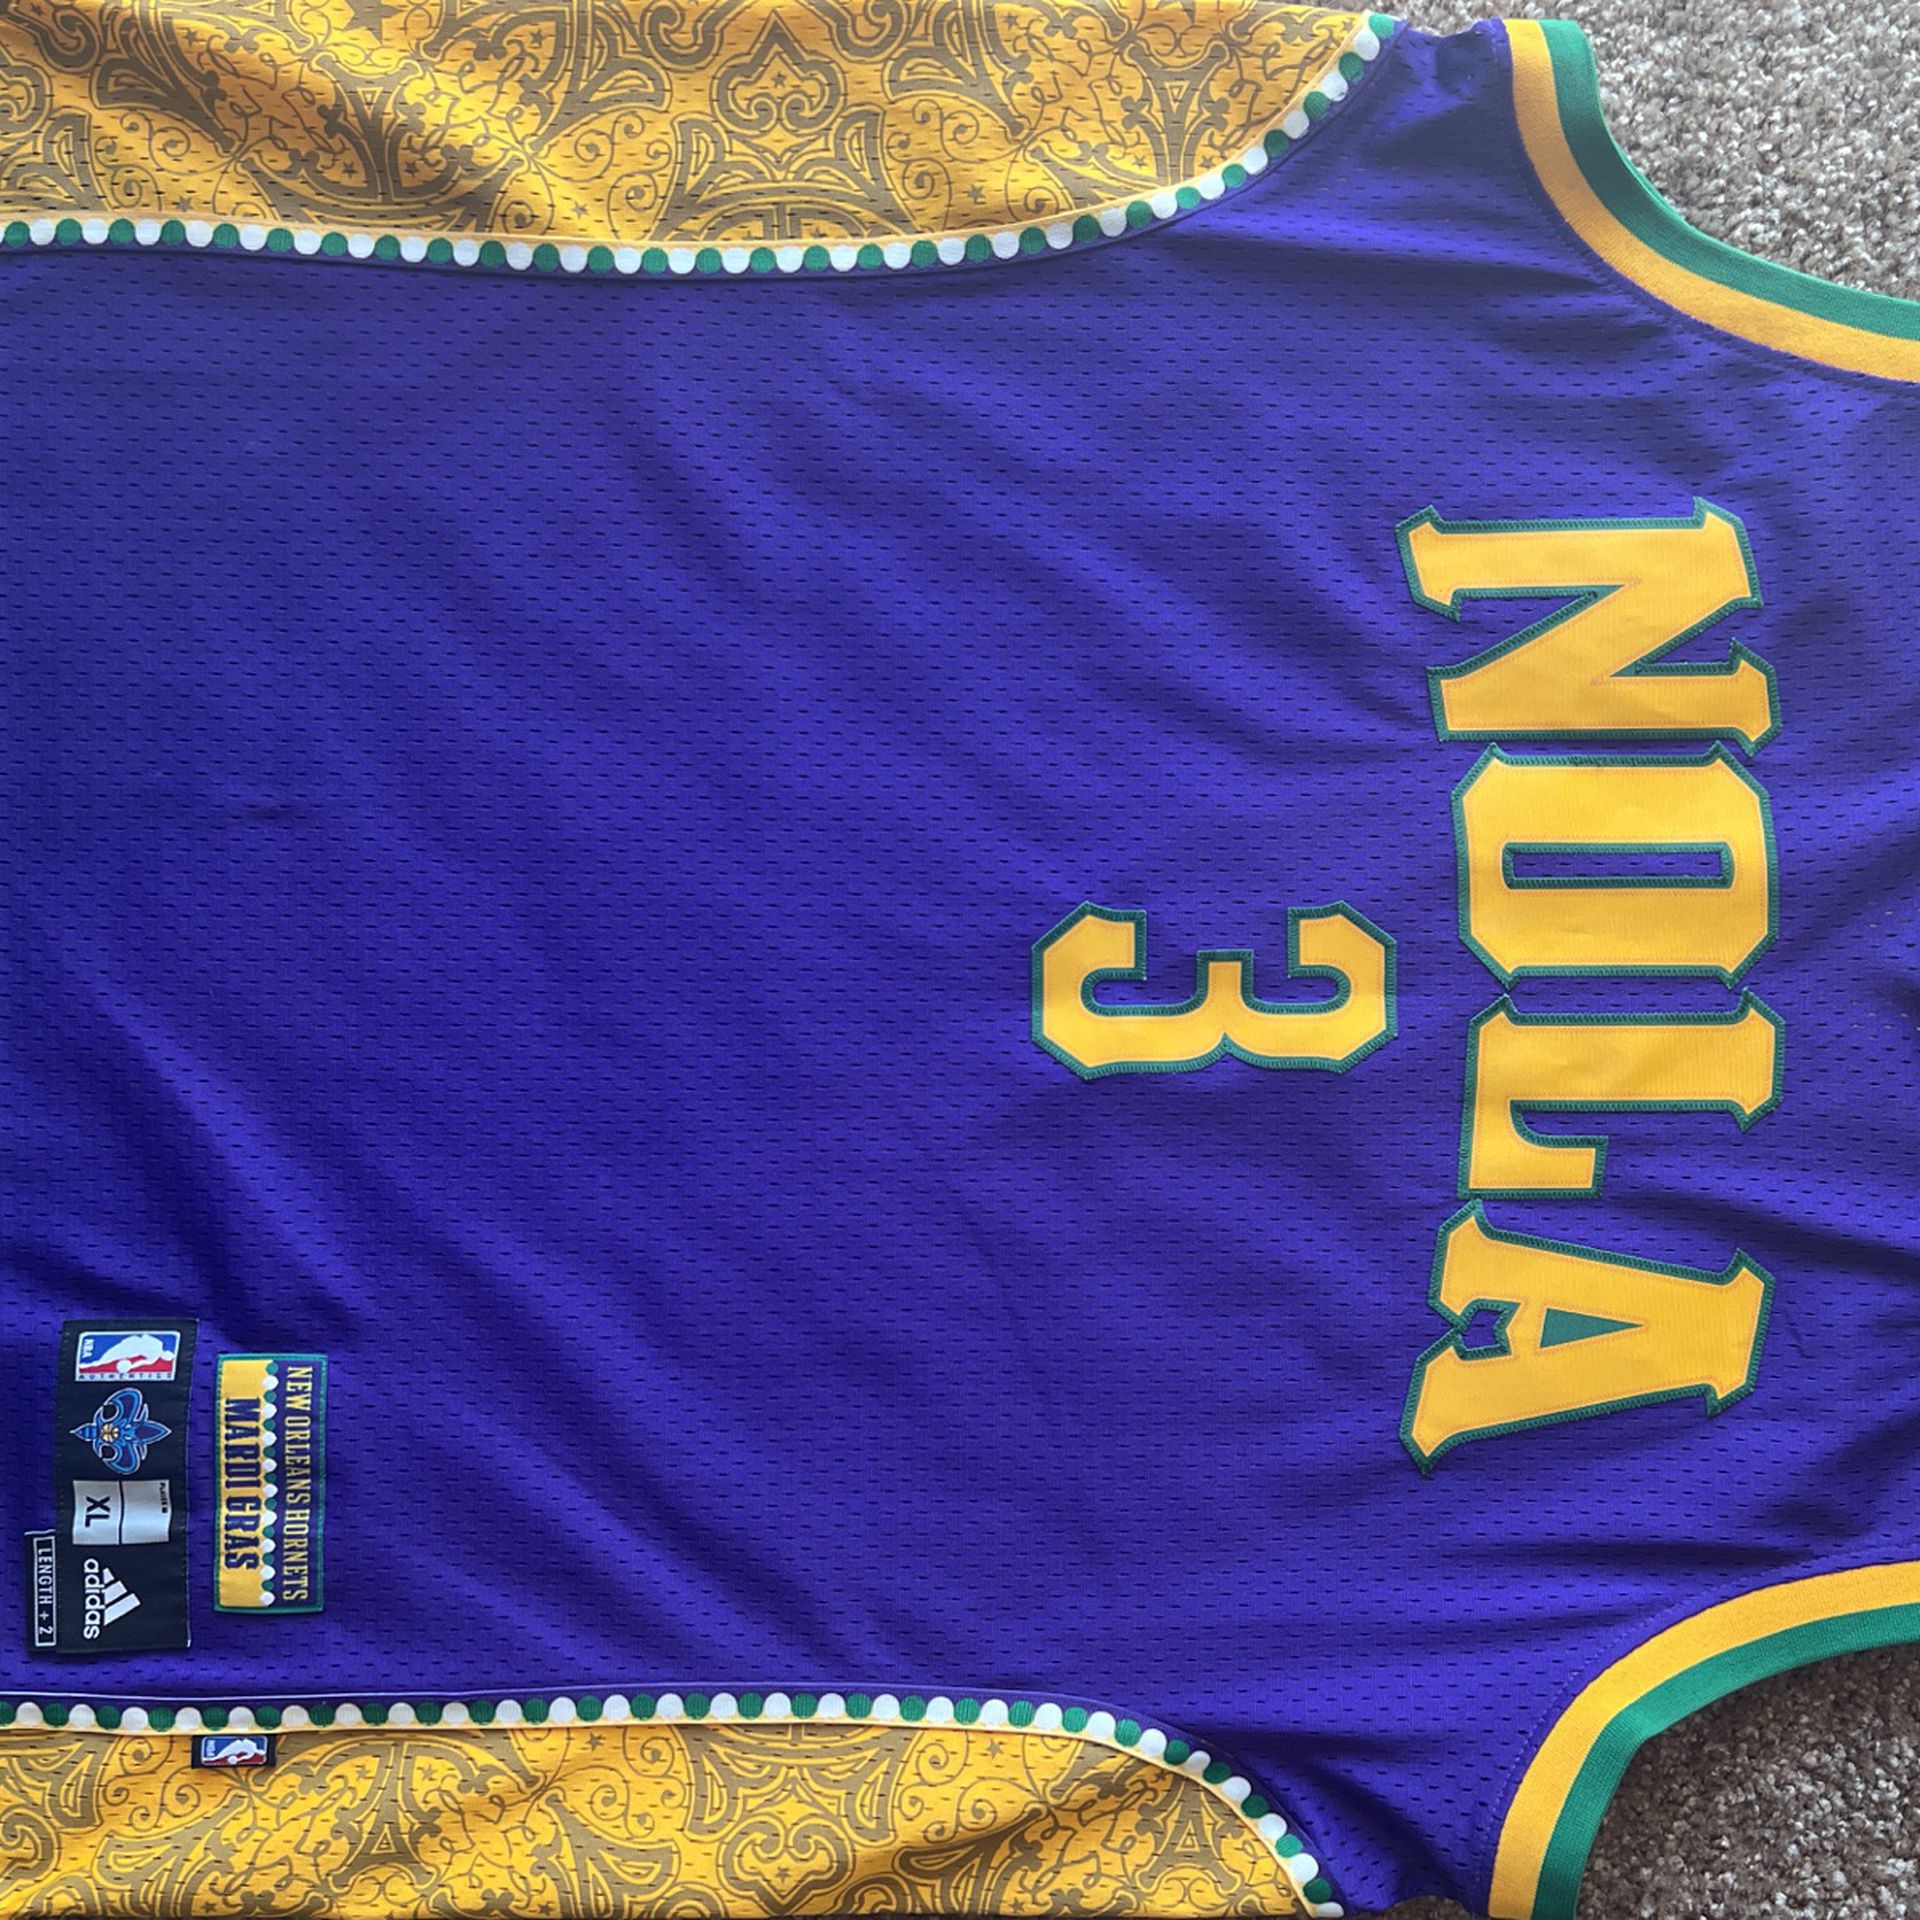 Chris Paul New Orleans Hornets NBA Throwback Jersey - Men's Large for Sale  in Brooklyn, NY - OfferUp